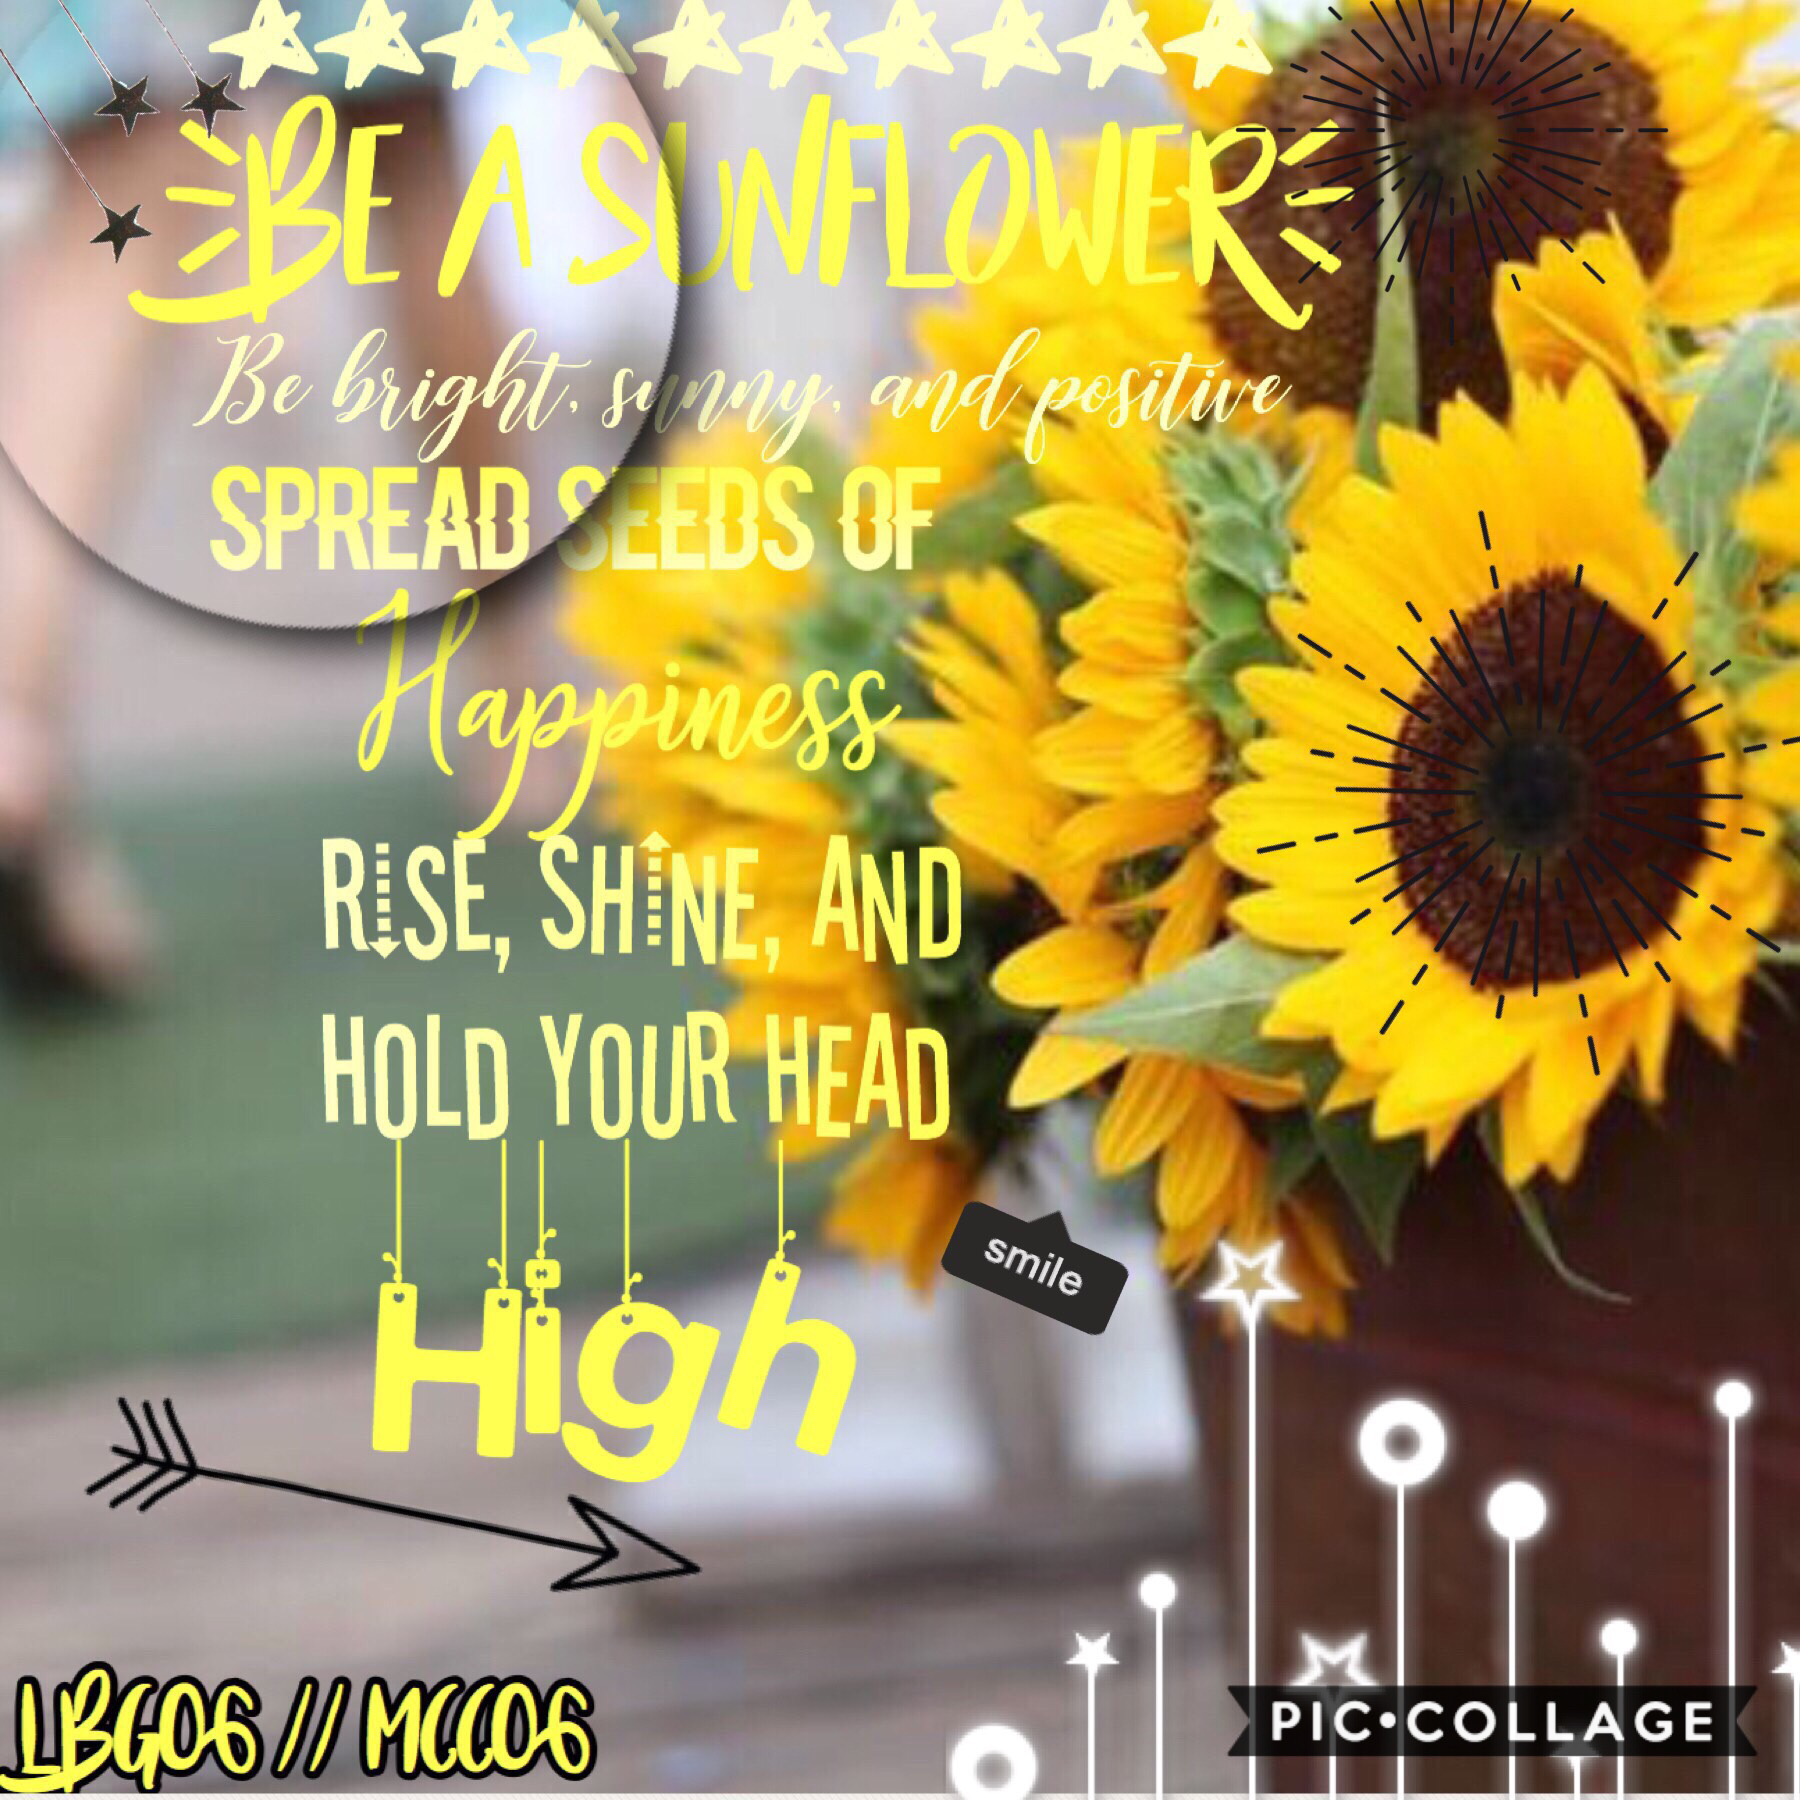 🌻tapy🌻

Collab with the amazing... MCC06! go follow her! 💛

Xoxo❤️🌻